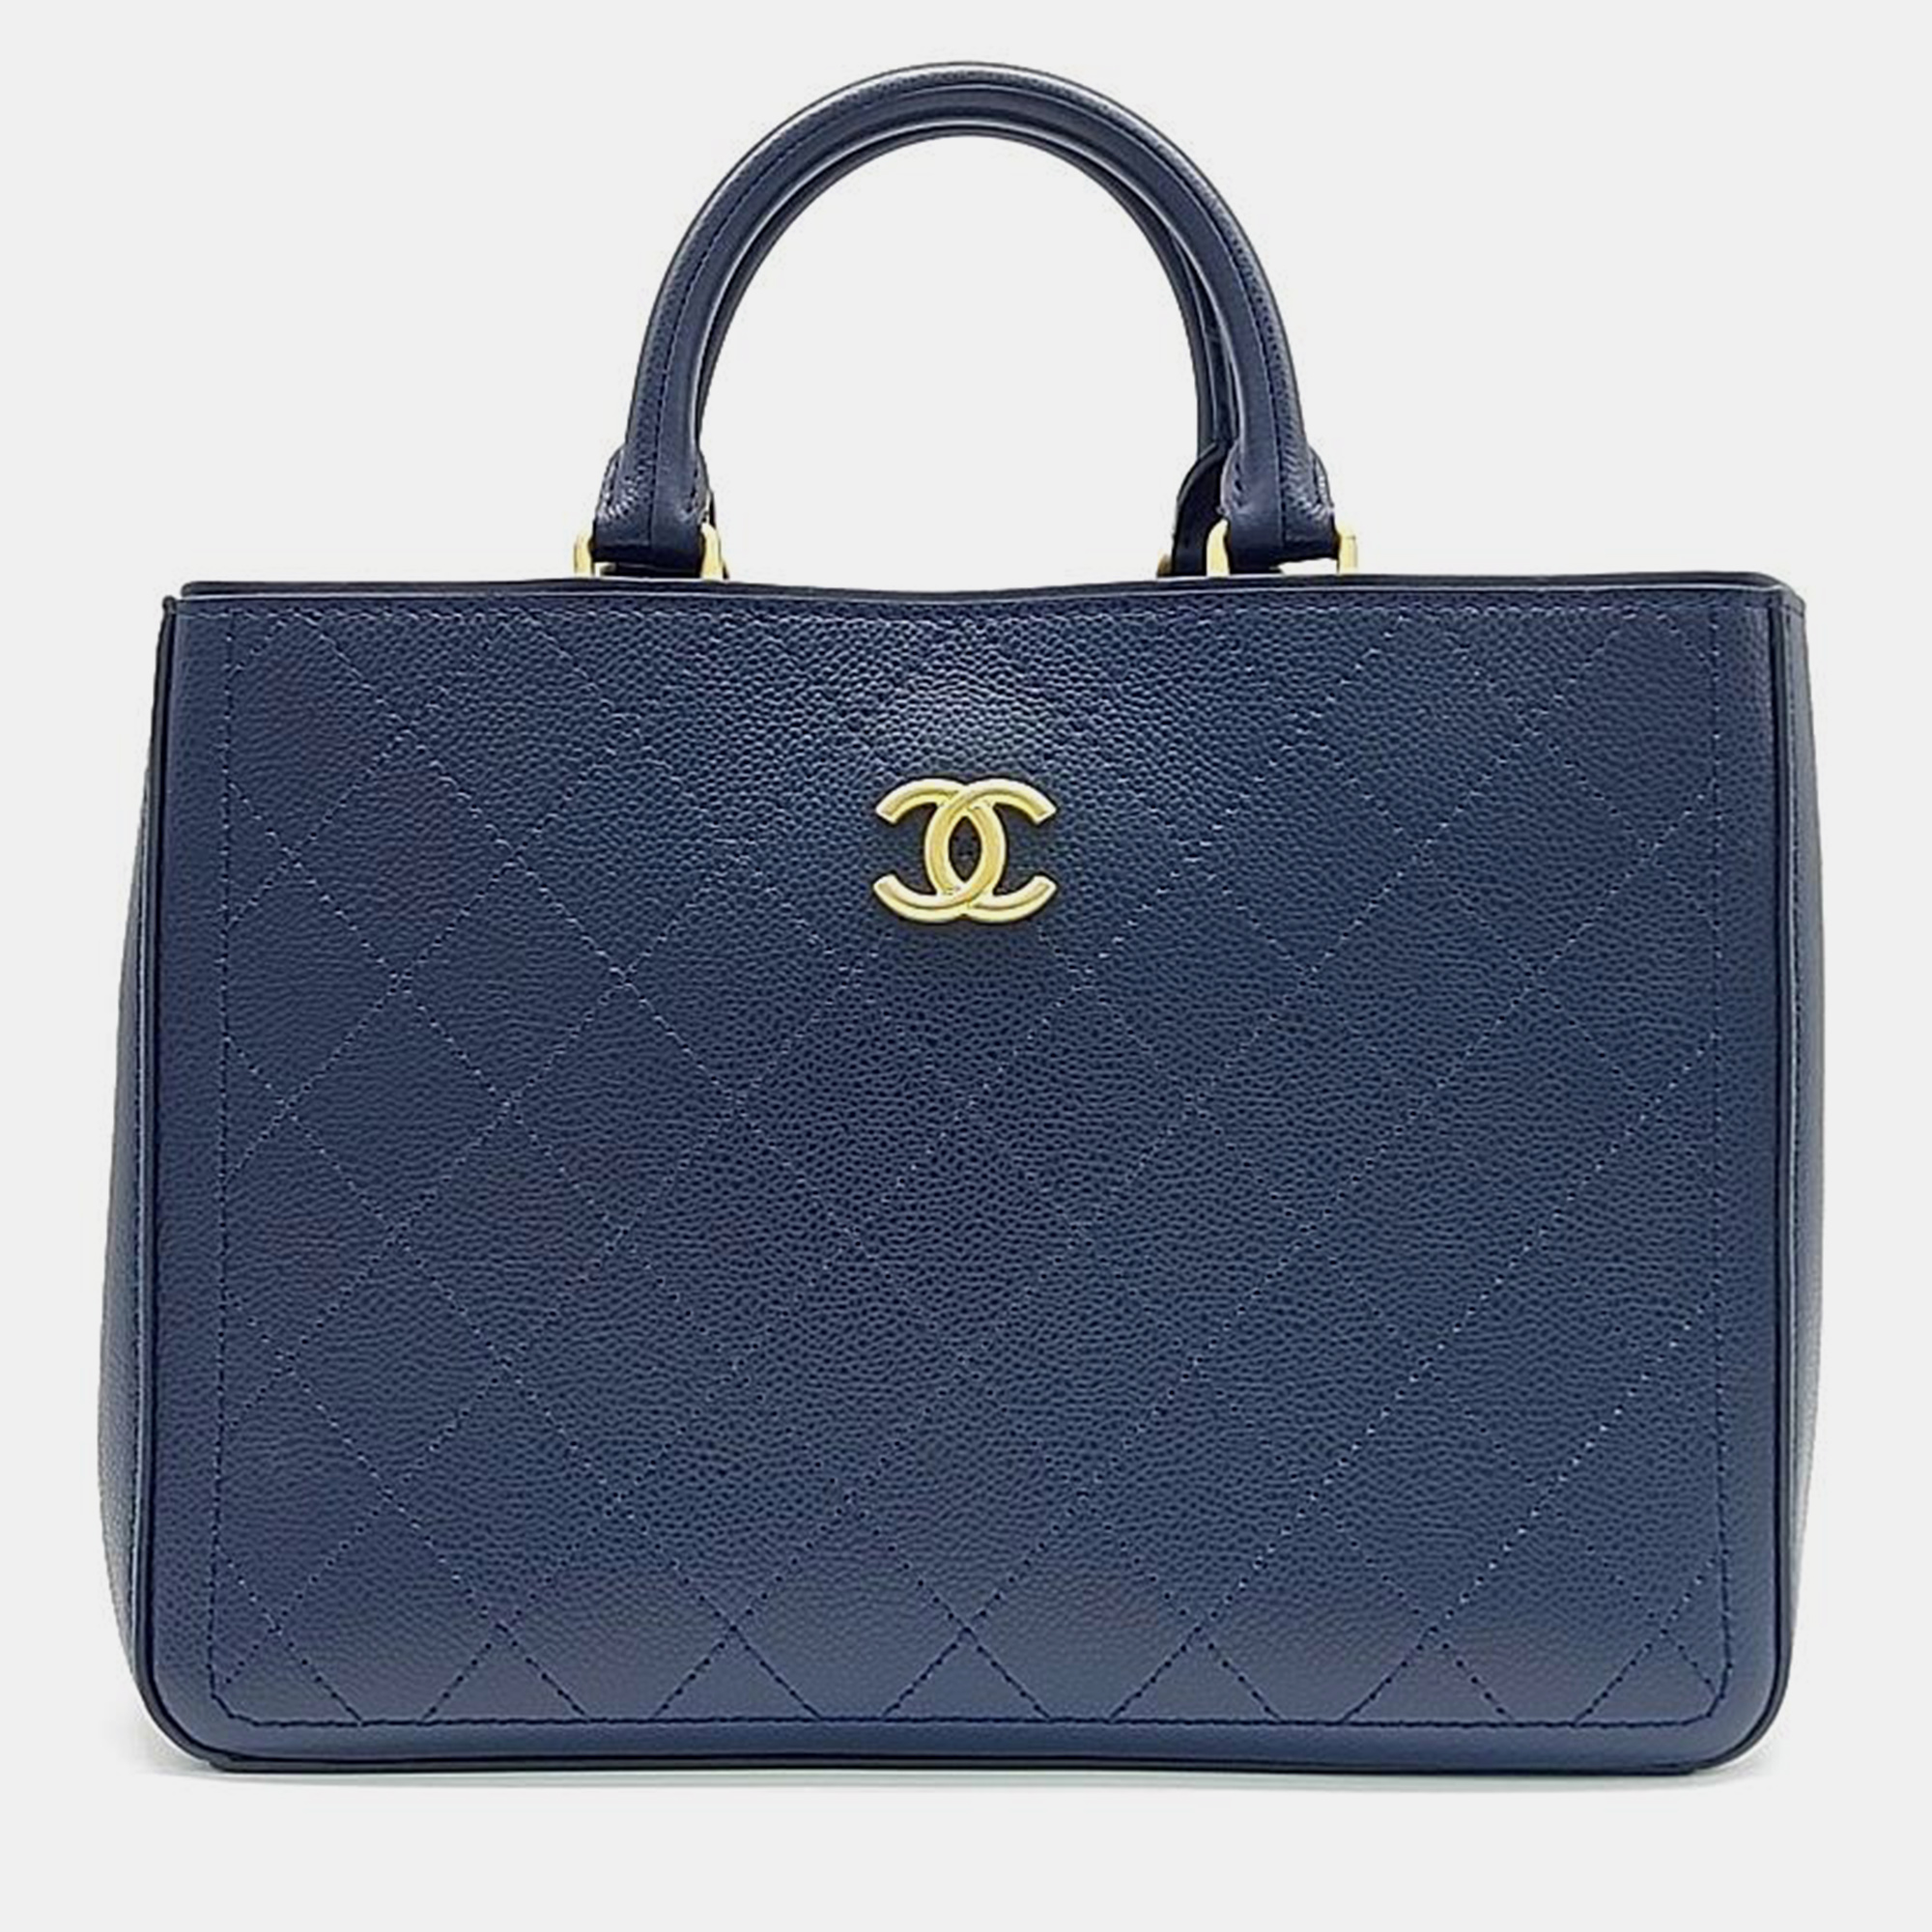 Uncompromising in quality and design this Chanel bag is a must have in any wardrobe. With its durable construction and luxurious finish its the perfect accessory for any occasion.